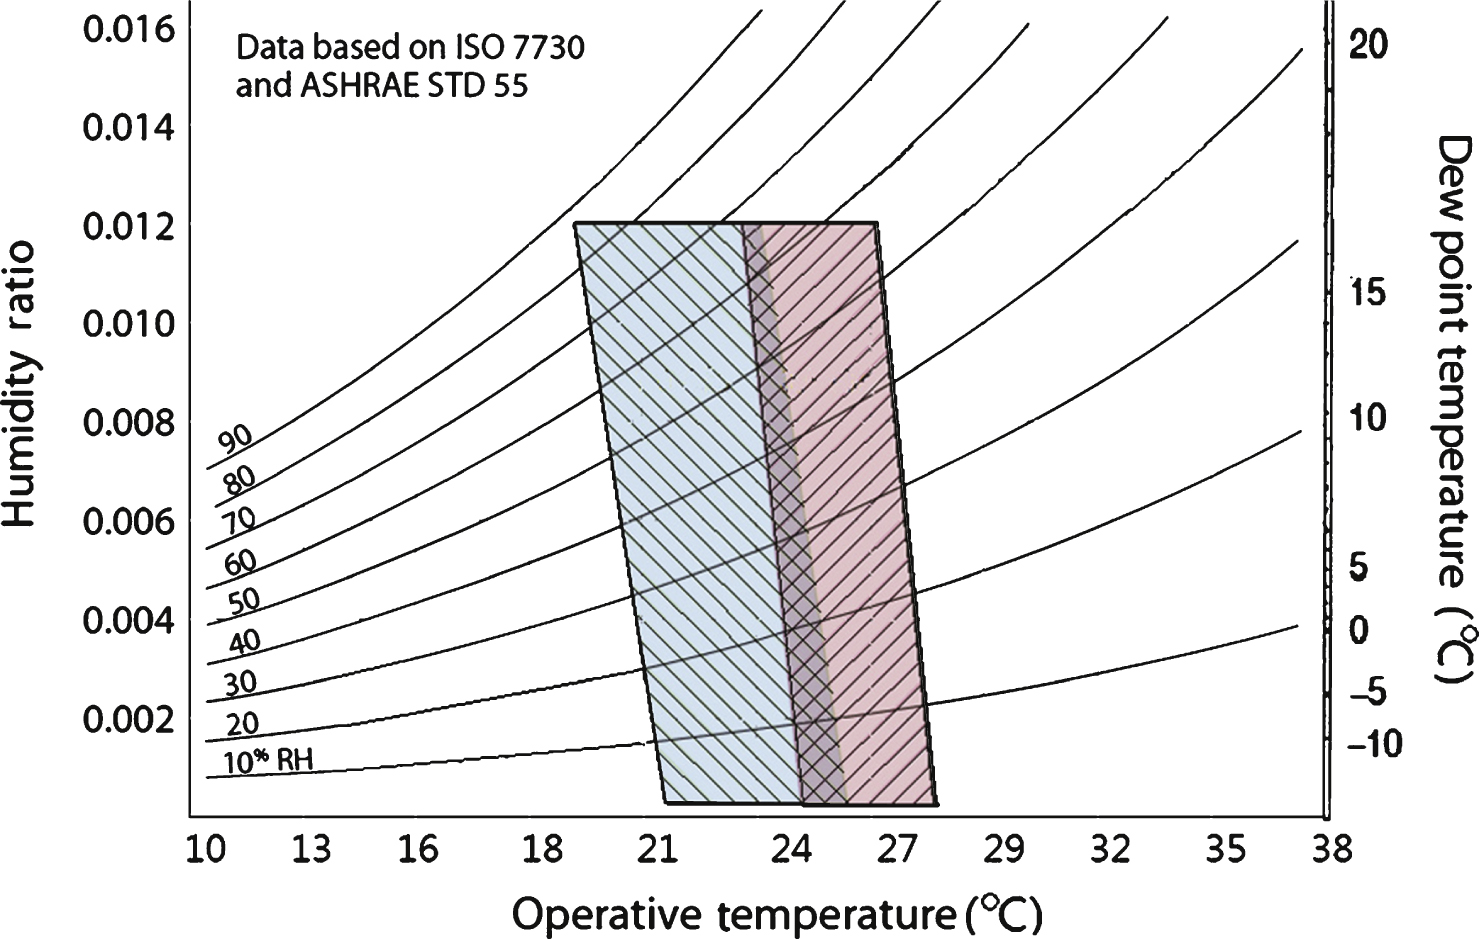 Acceptable range of operative temperature and humidity for the thermal comfort rooms [21, 39].